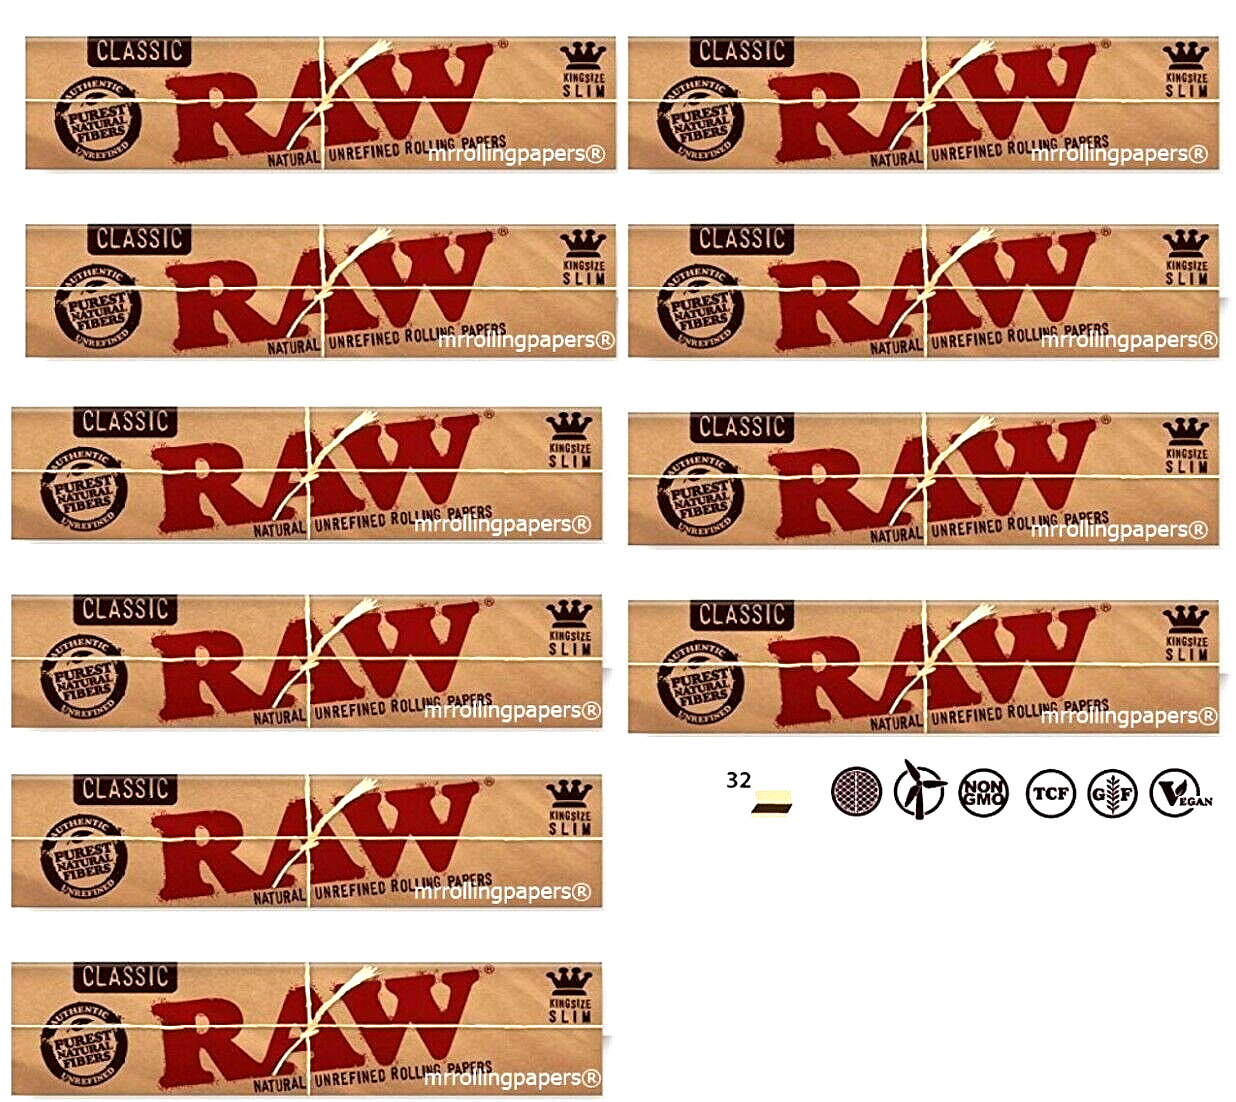 10x Raw  Classic King Size Rolling Papers Slim 10 PKS *Best Price* USA SHIPPED